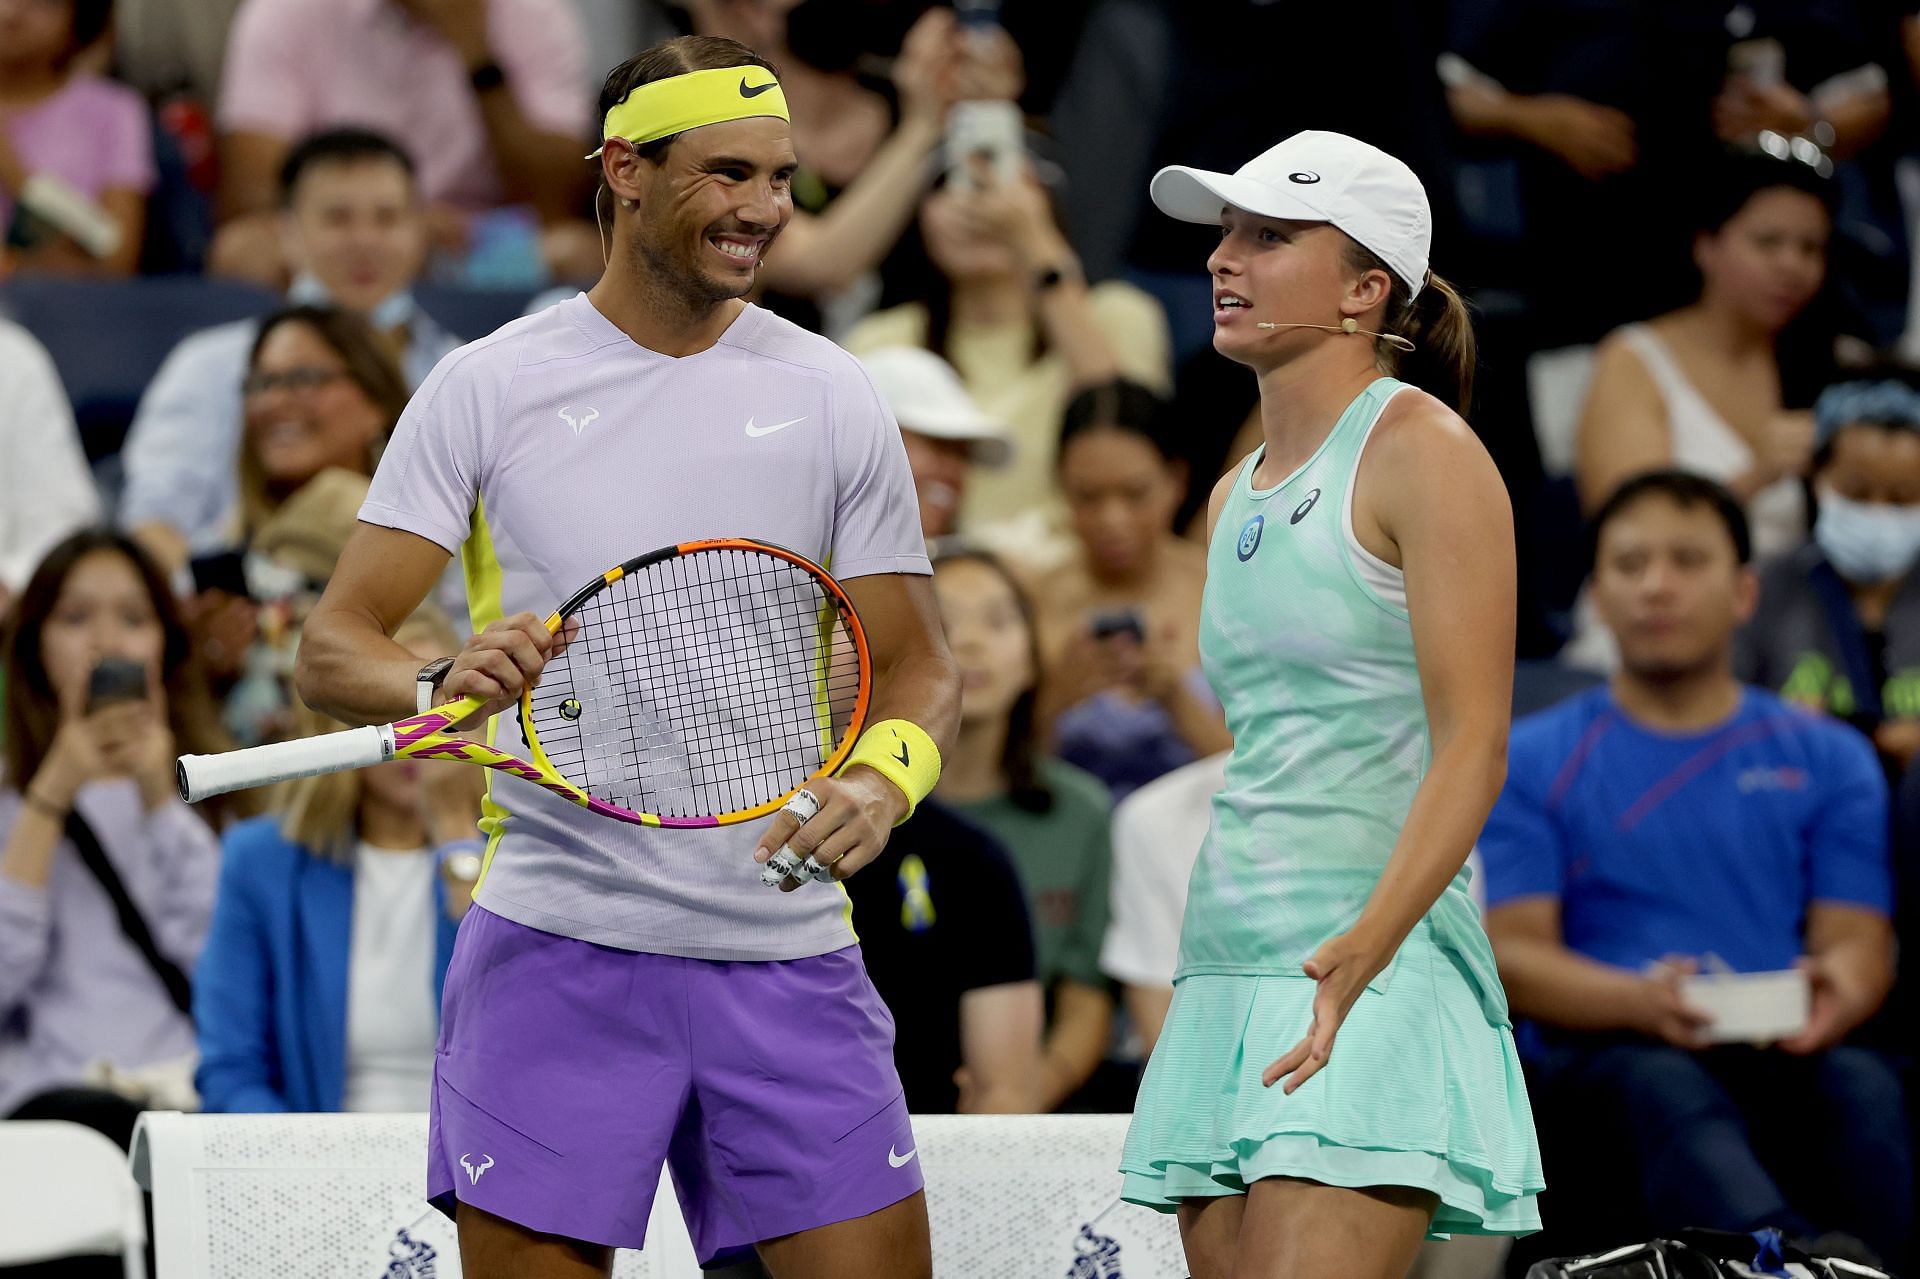 5 best moments from Rafael Nadal and Iga Swiatek's doubles match in US